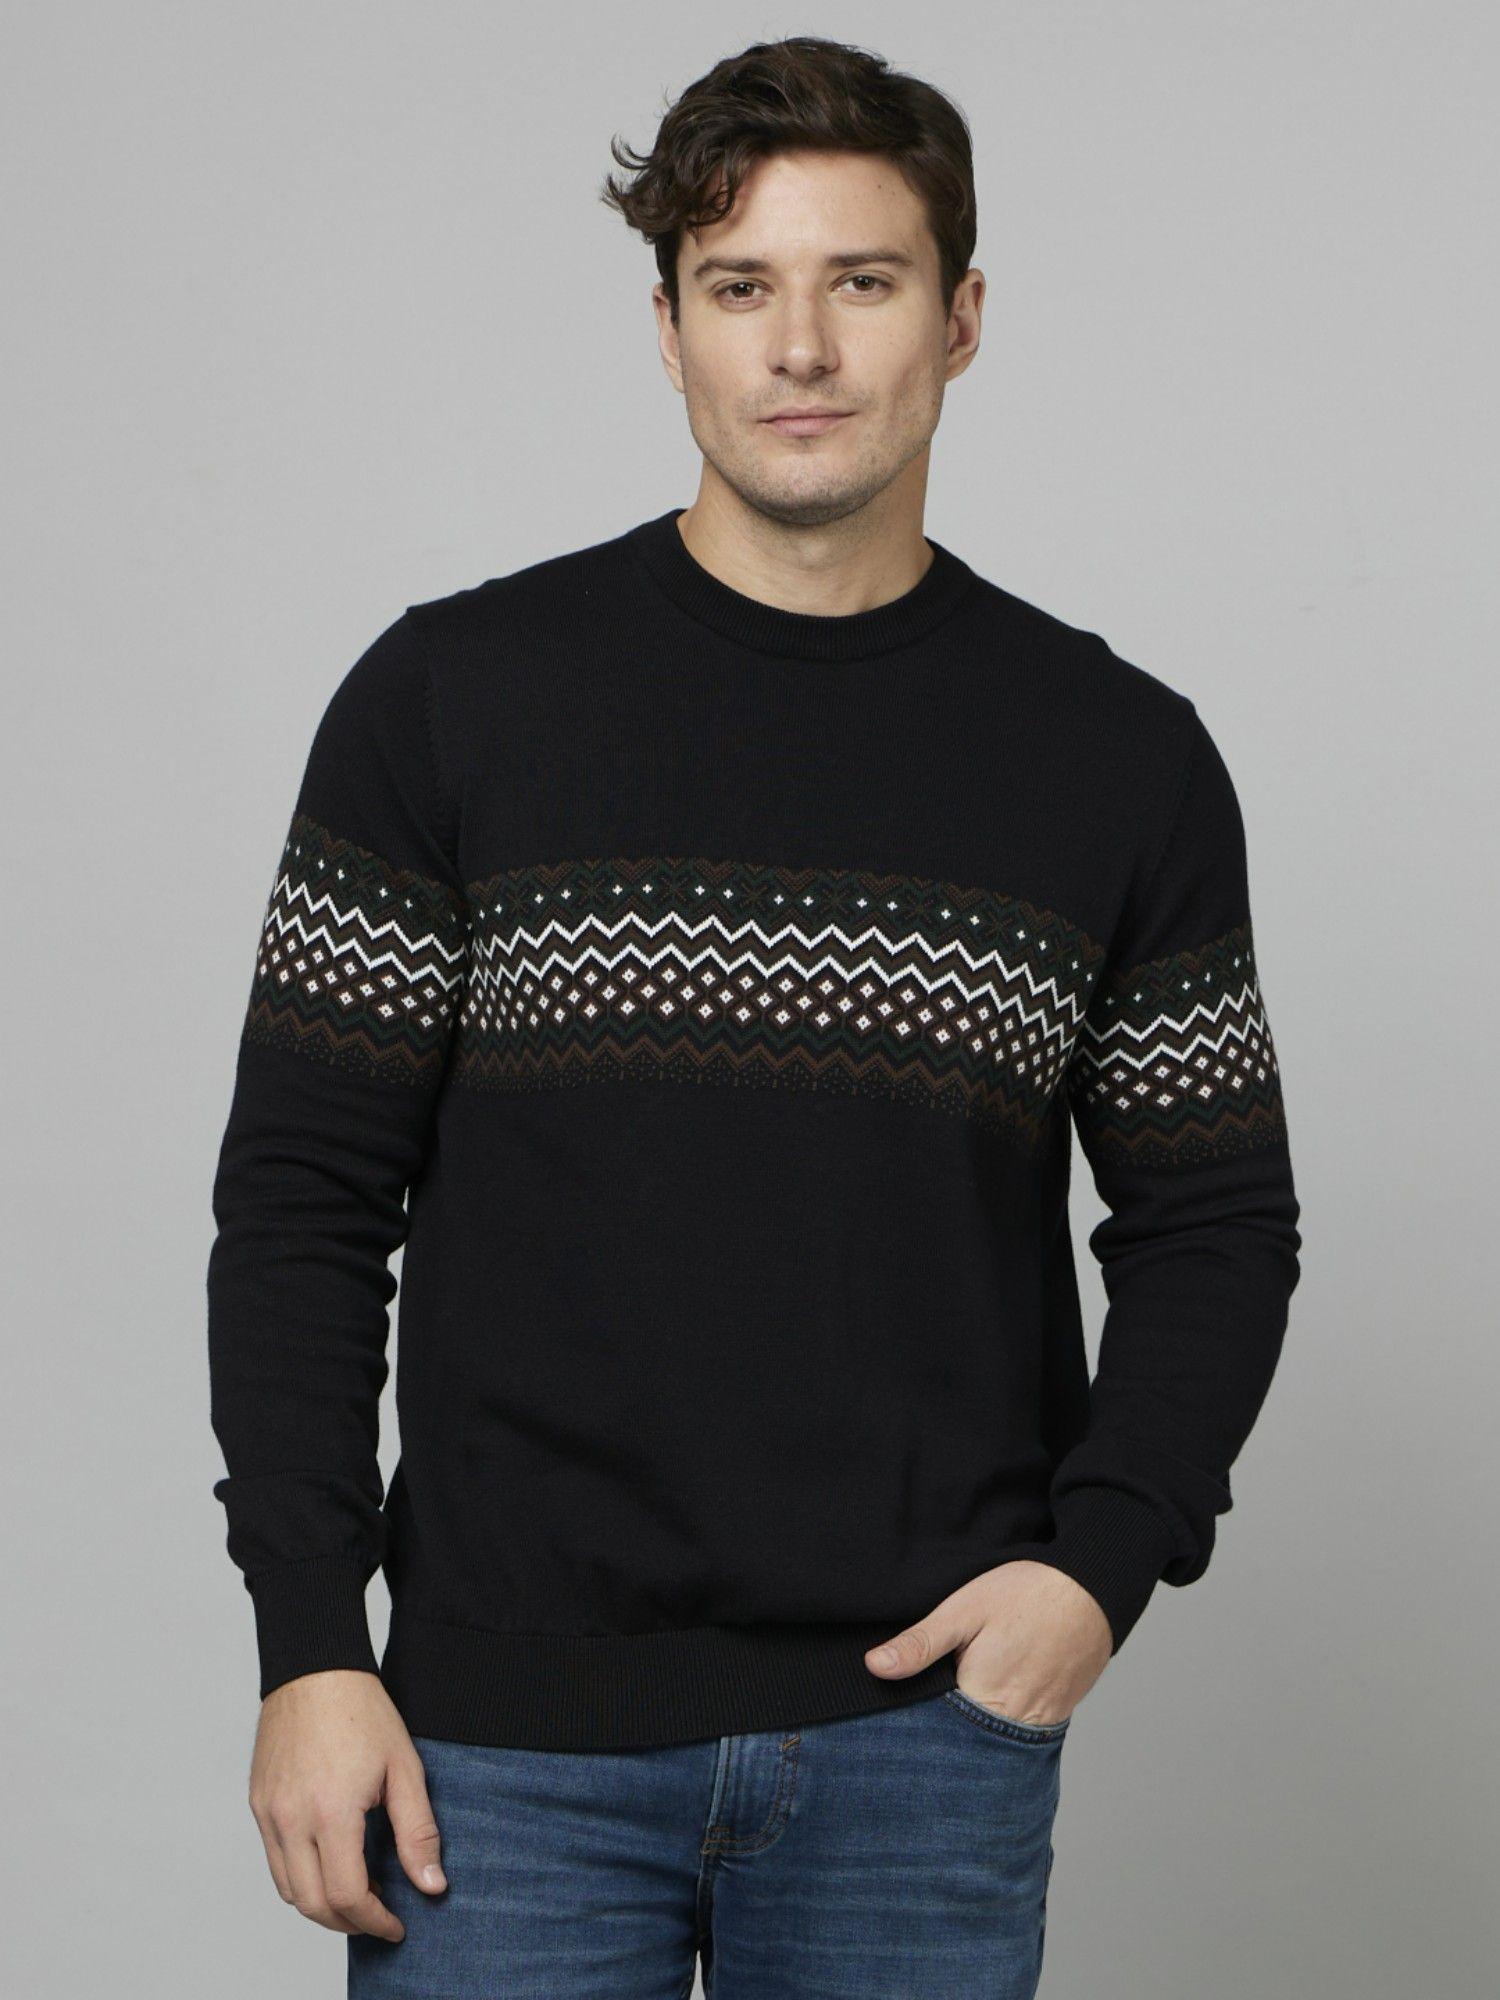 printed-black-long-sleeves-round-neck-structured-sweater